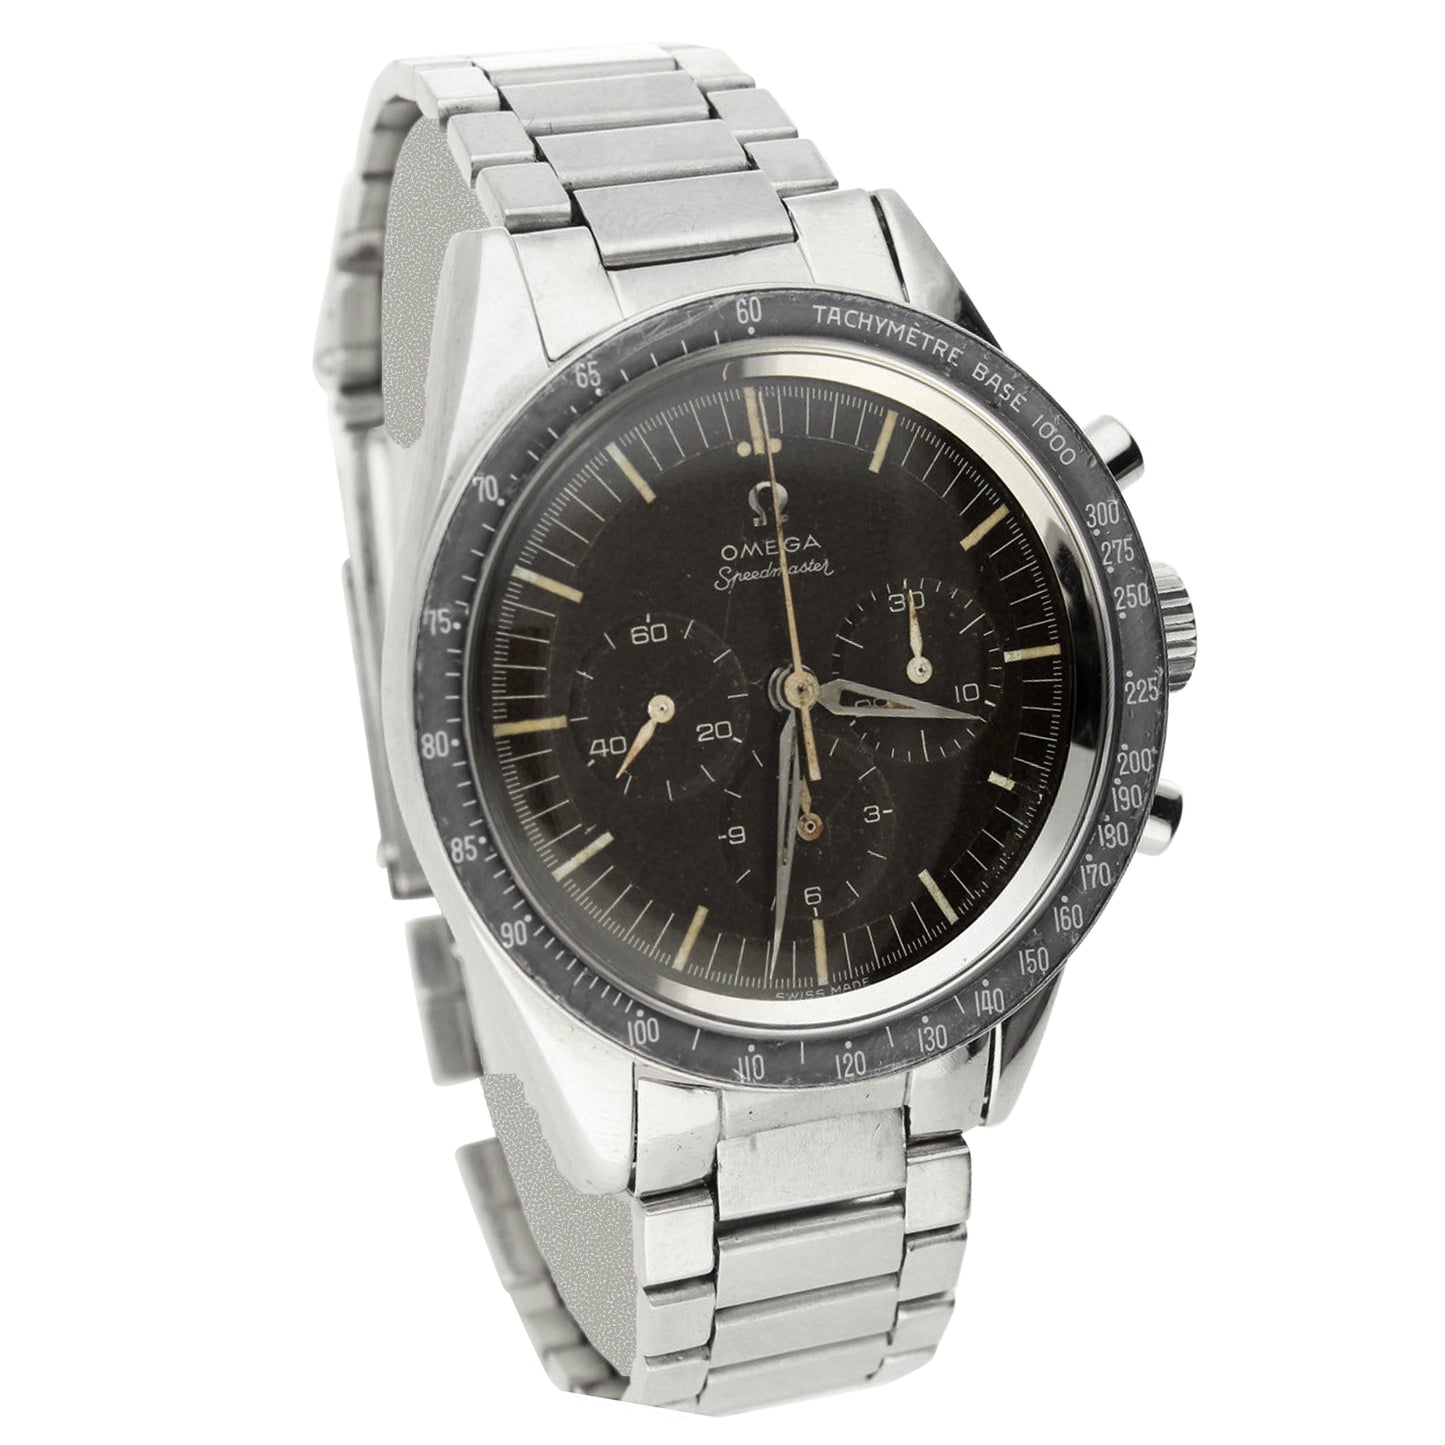 Stainless steel, reference 2998-1 Speedmaster chronograph wristwatch. Made 1960